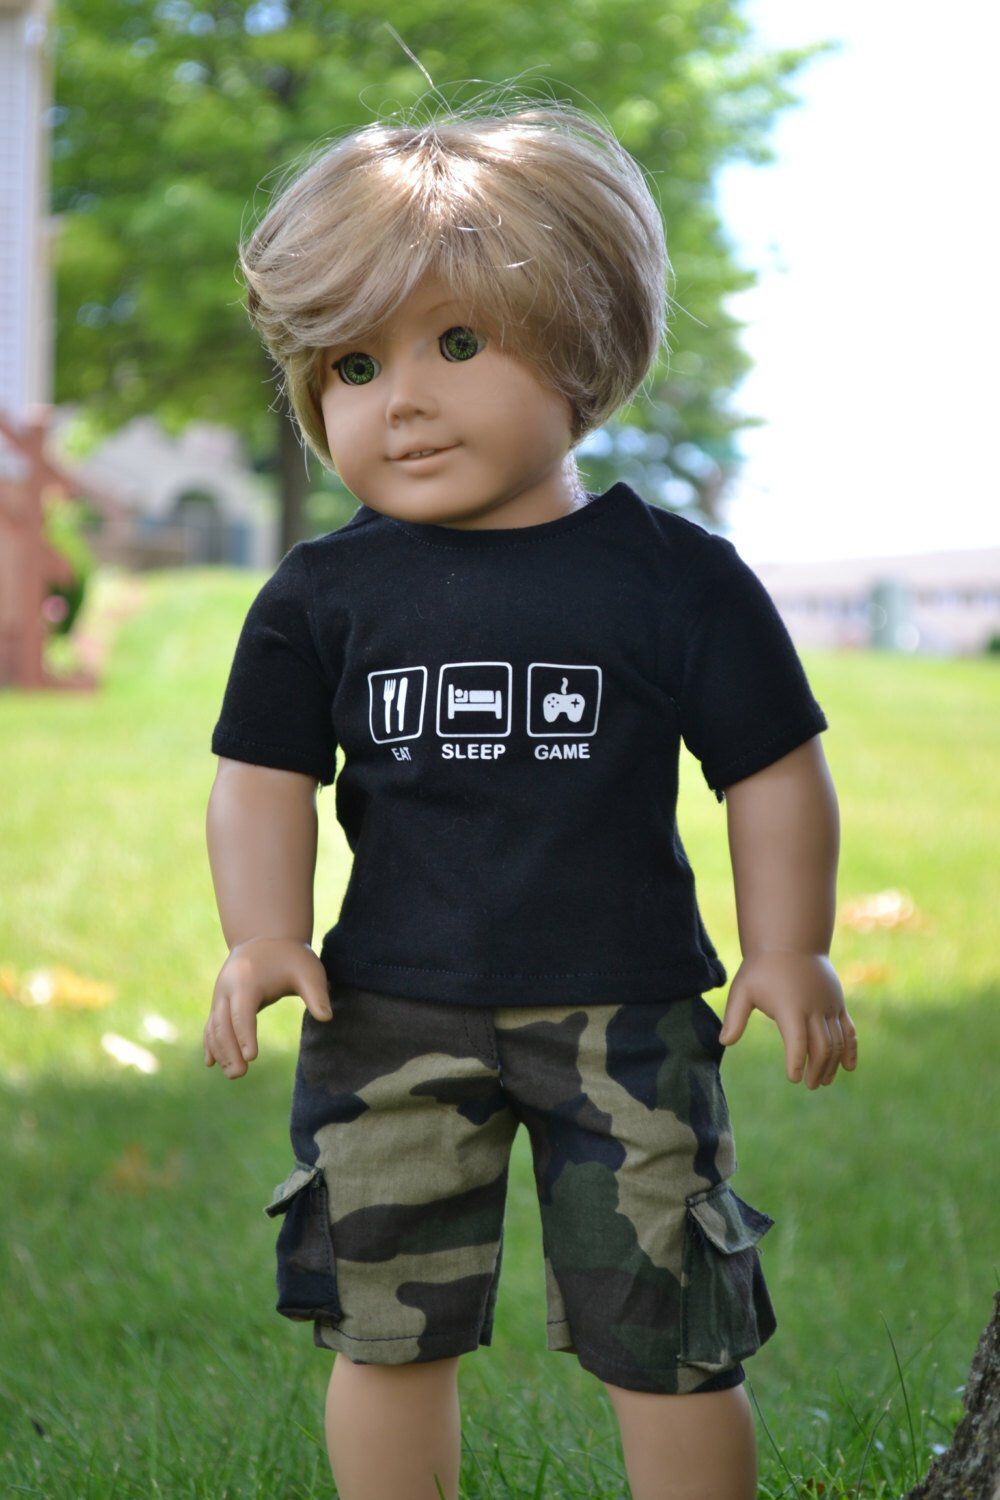 18 inch Doll Clothes, Graphic T-shirt, Eat Sleep Game, Gamer Style, Boy Doll Clothes, Black Tee, fits American Girl - MADE TO ORDER -   style Boy cute